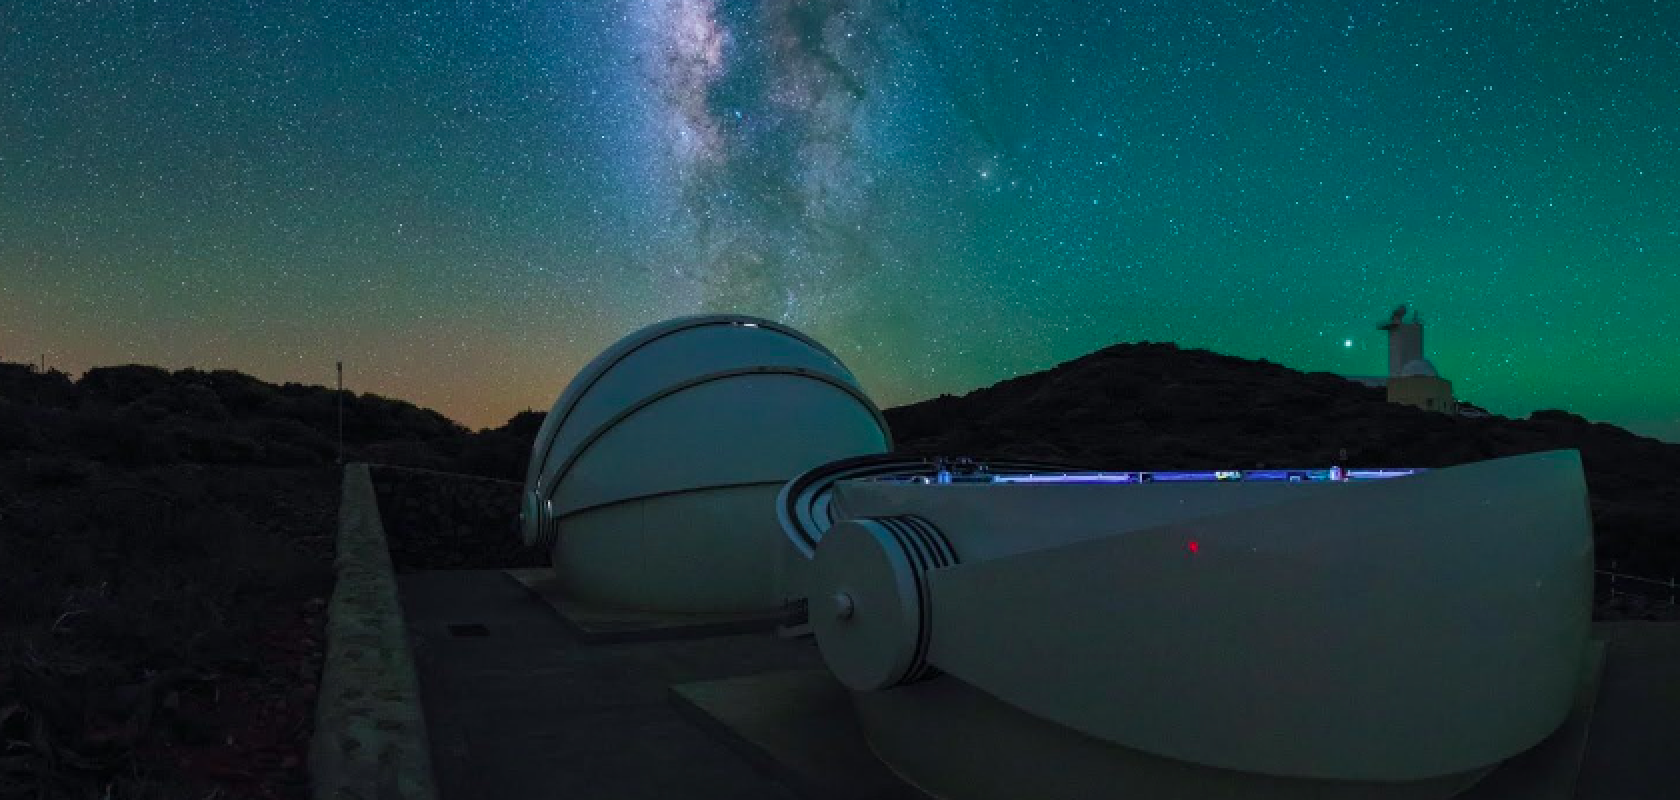 The University of Warwick project will be backed by funding from the European Research Council which aims to support excellent frontier research (Image: GOTO Observatory)